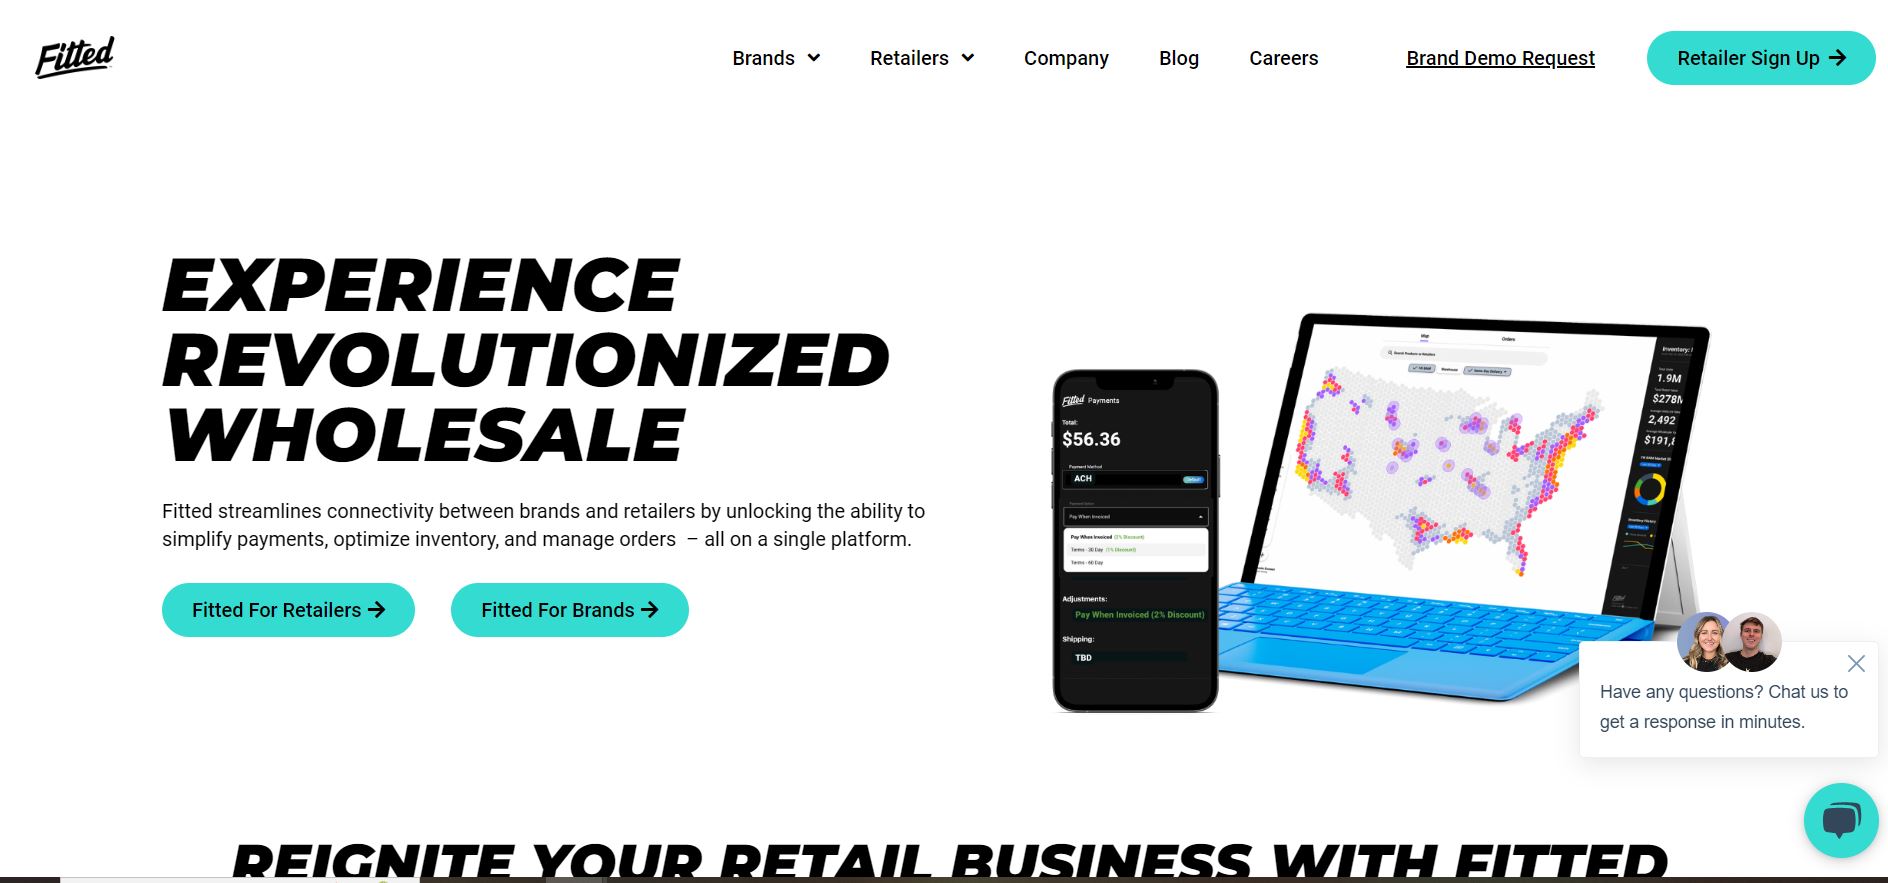 Fitted revolutionizing the way brands and retailers connect, with an impressive raised of $8.50 million in Pre-Seed funding.